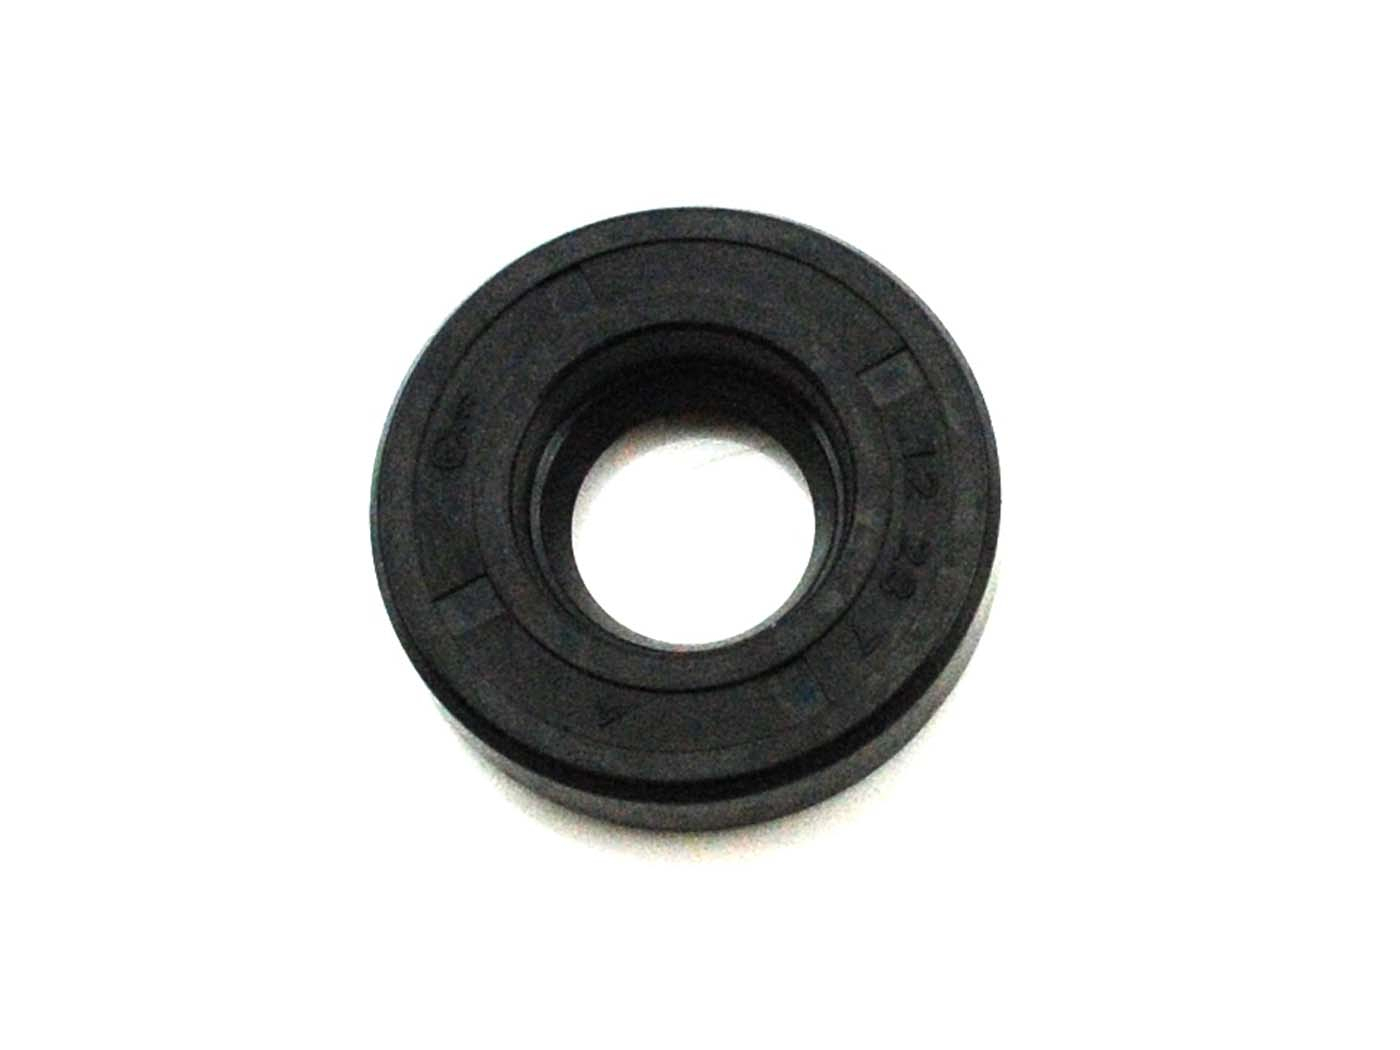 Gearbox Sealing Ring Drilastic 12x28x7mm For SR 1, 2, 2E, KR 50